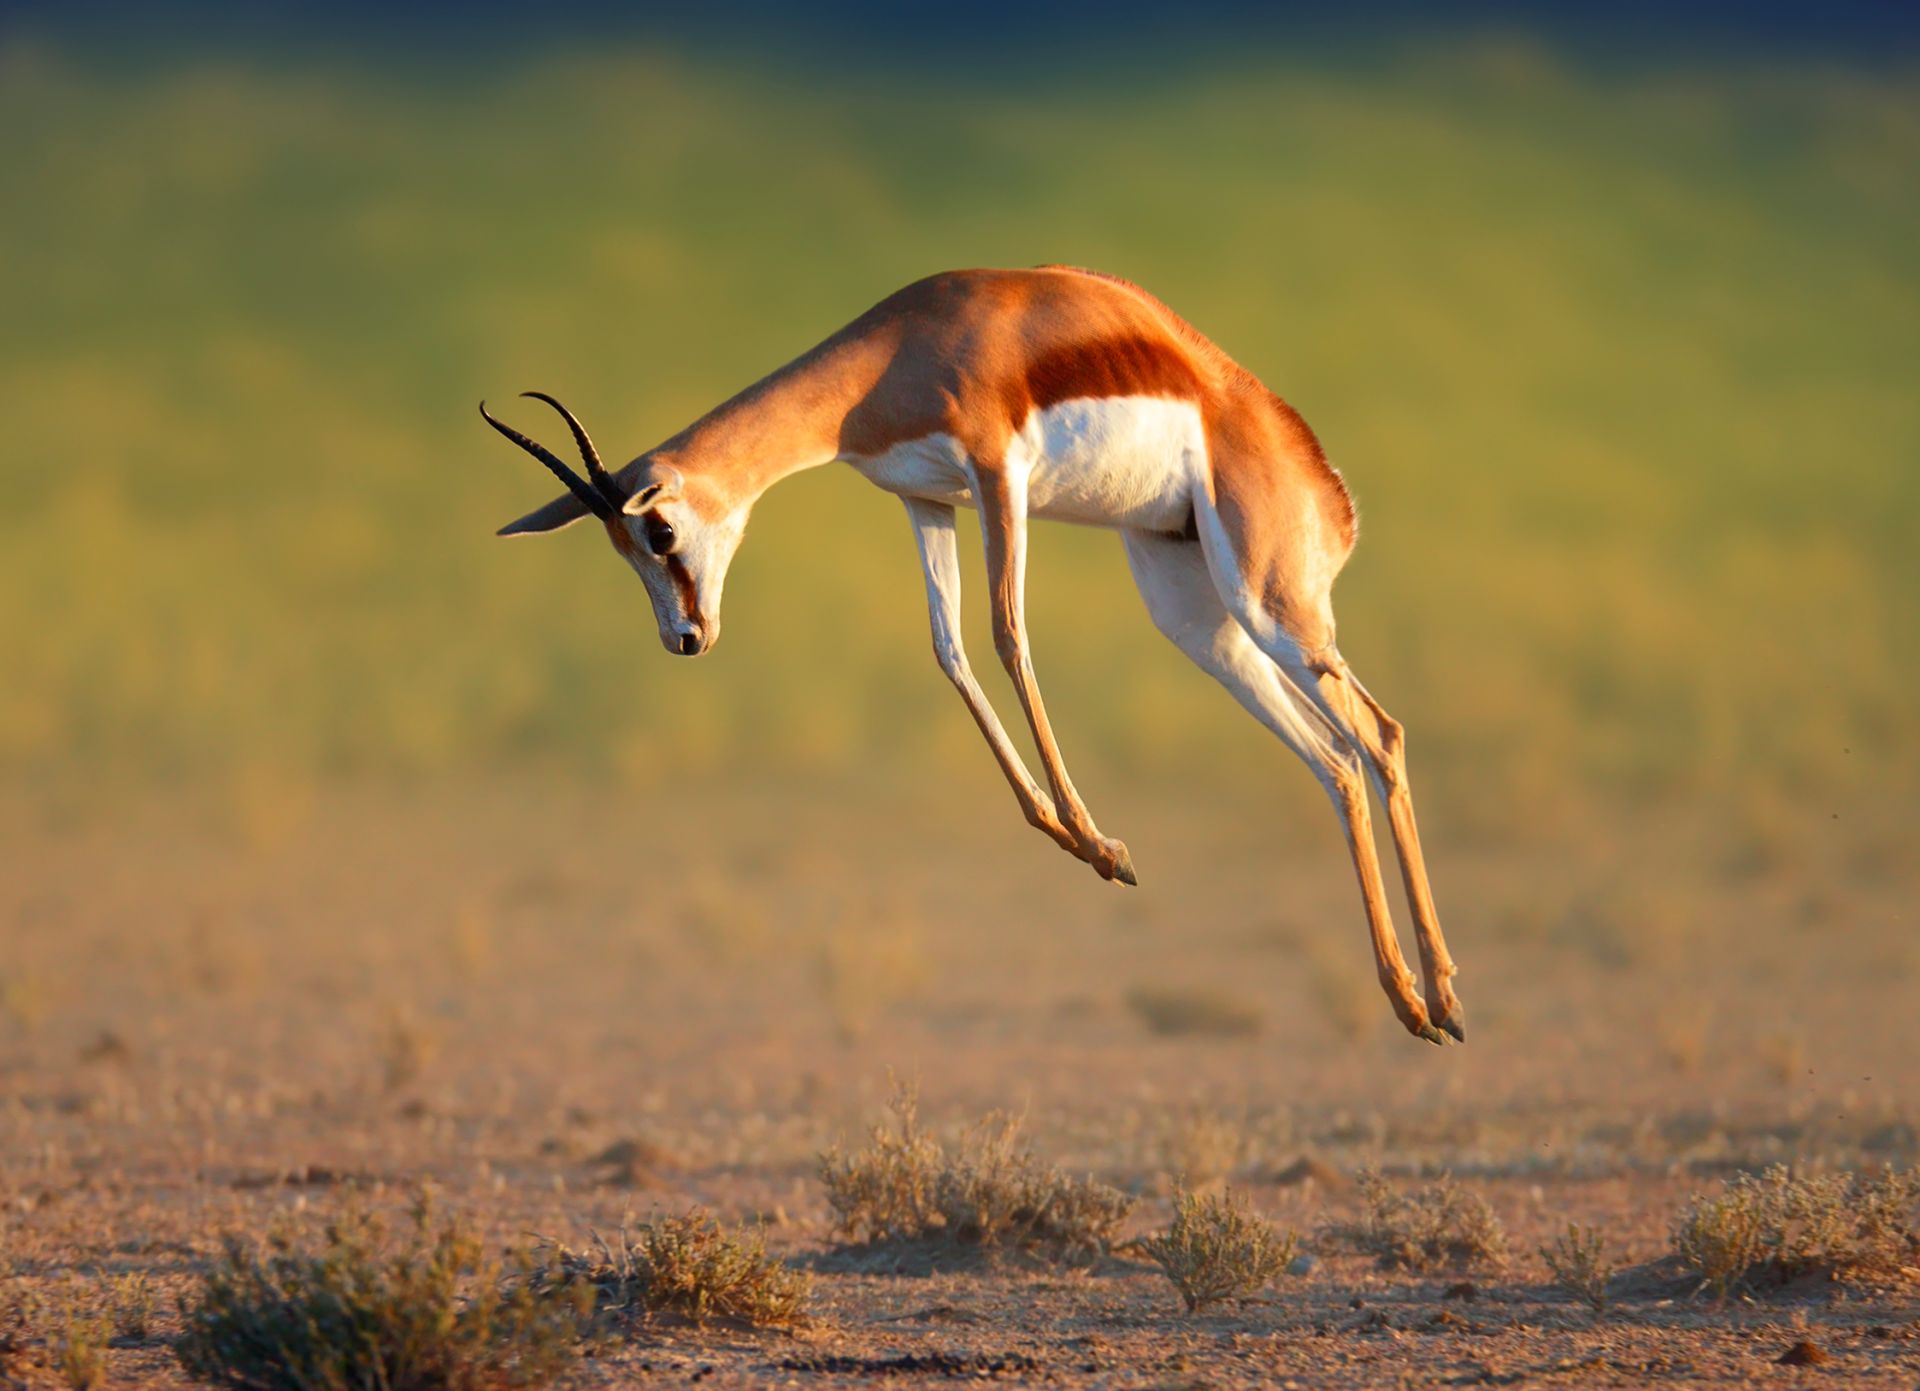 Springbok Facts | What Is A Springbok? | DK Find Out